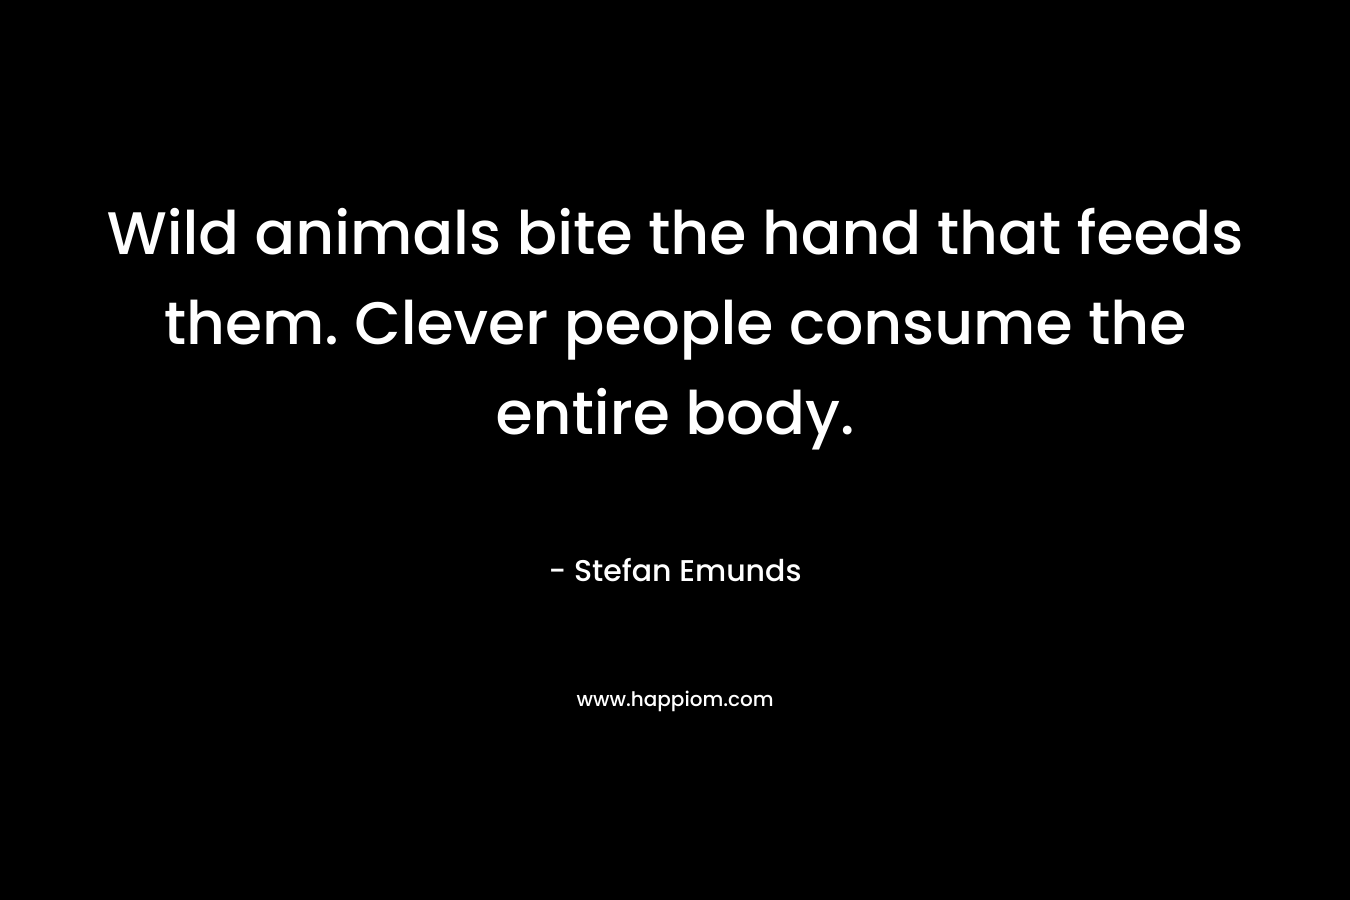 Wild animals bite the hand that feeds them. Clever people consume the entire body. – Stefan Emunds